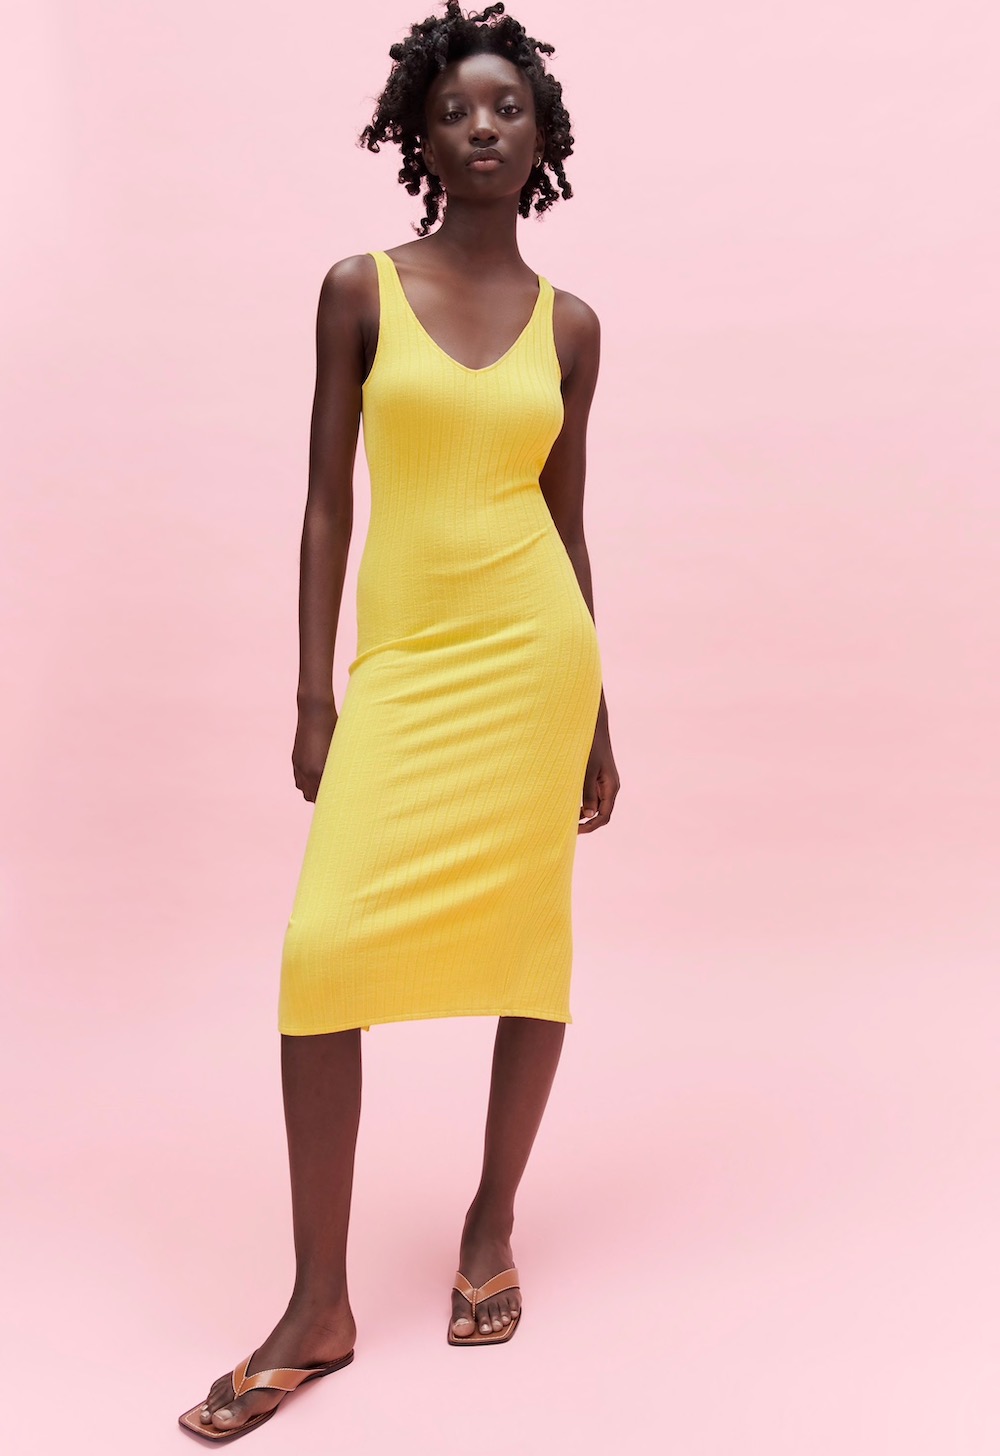 Solar Yellow Clothing a la Lorde for Summer - theFashionSpot